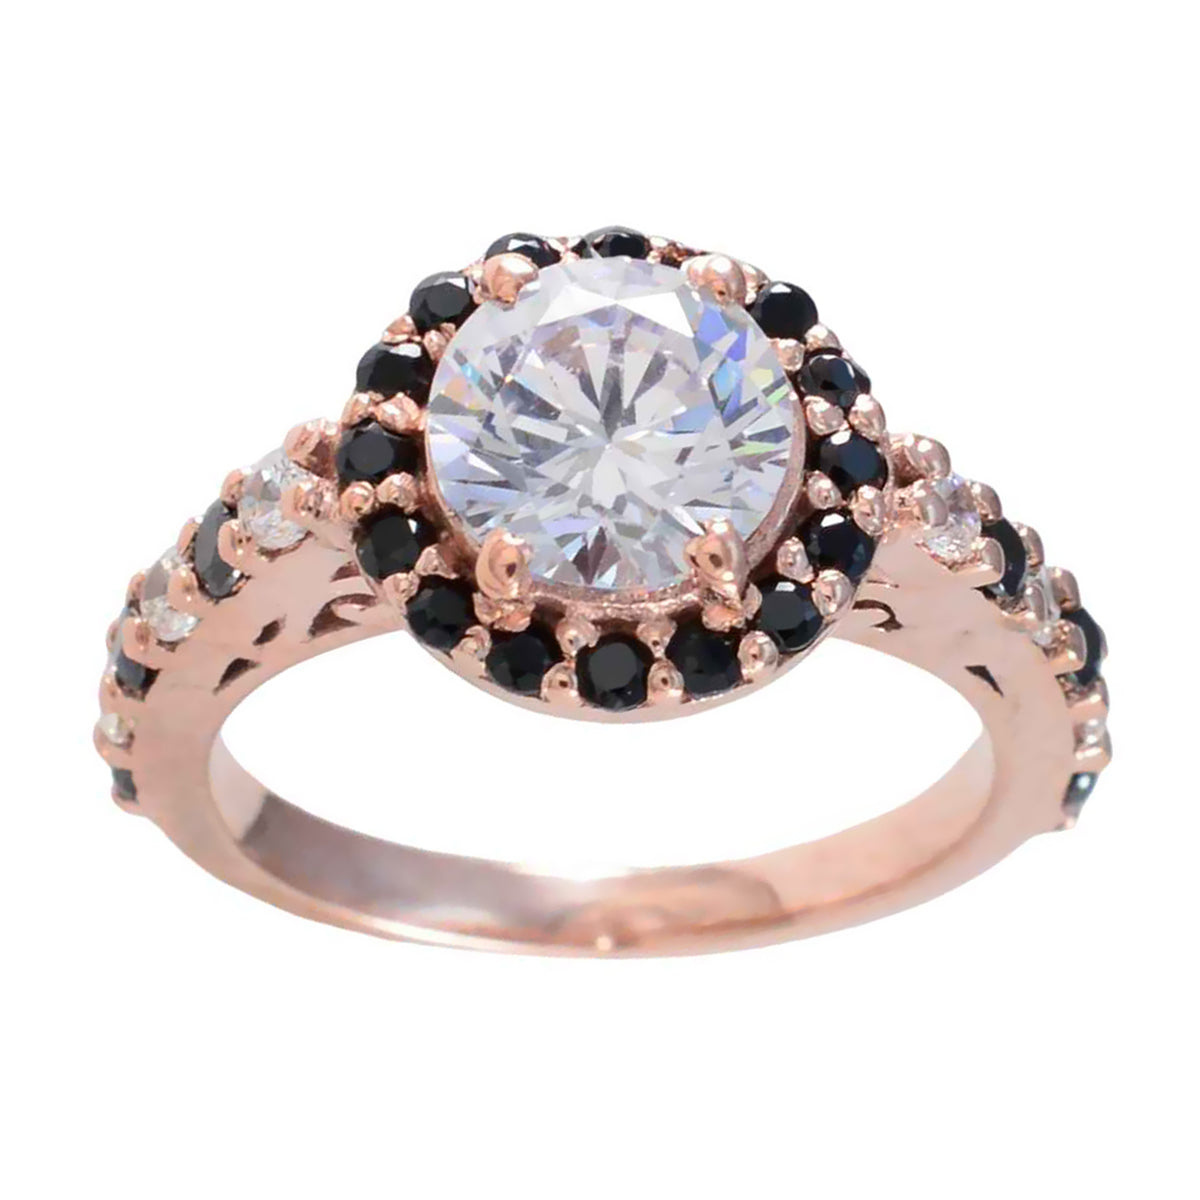 Riyo Choice Silver Ring With Rose Gold Plating Blue Sapphire Stone Round Shape Prong Setting Bridal Jewelry Christmas Ring